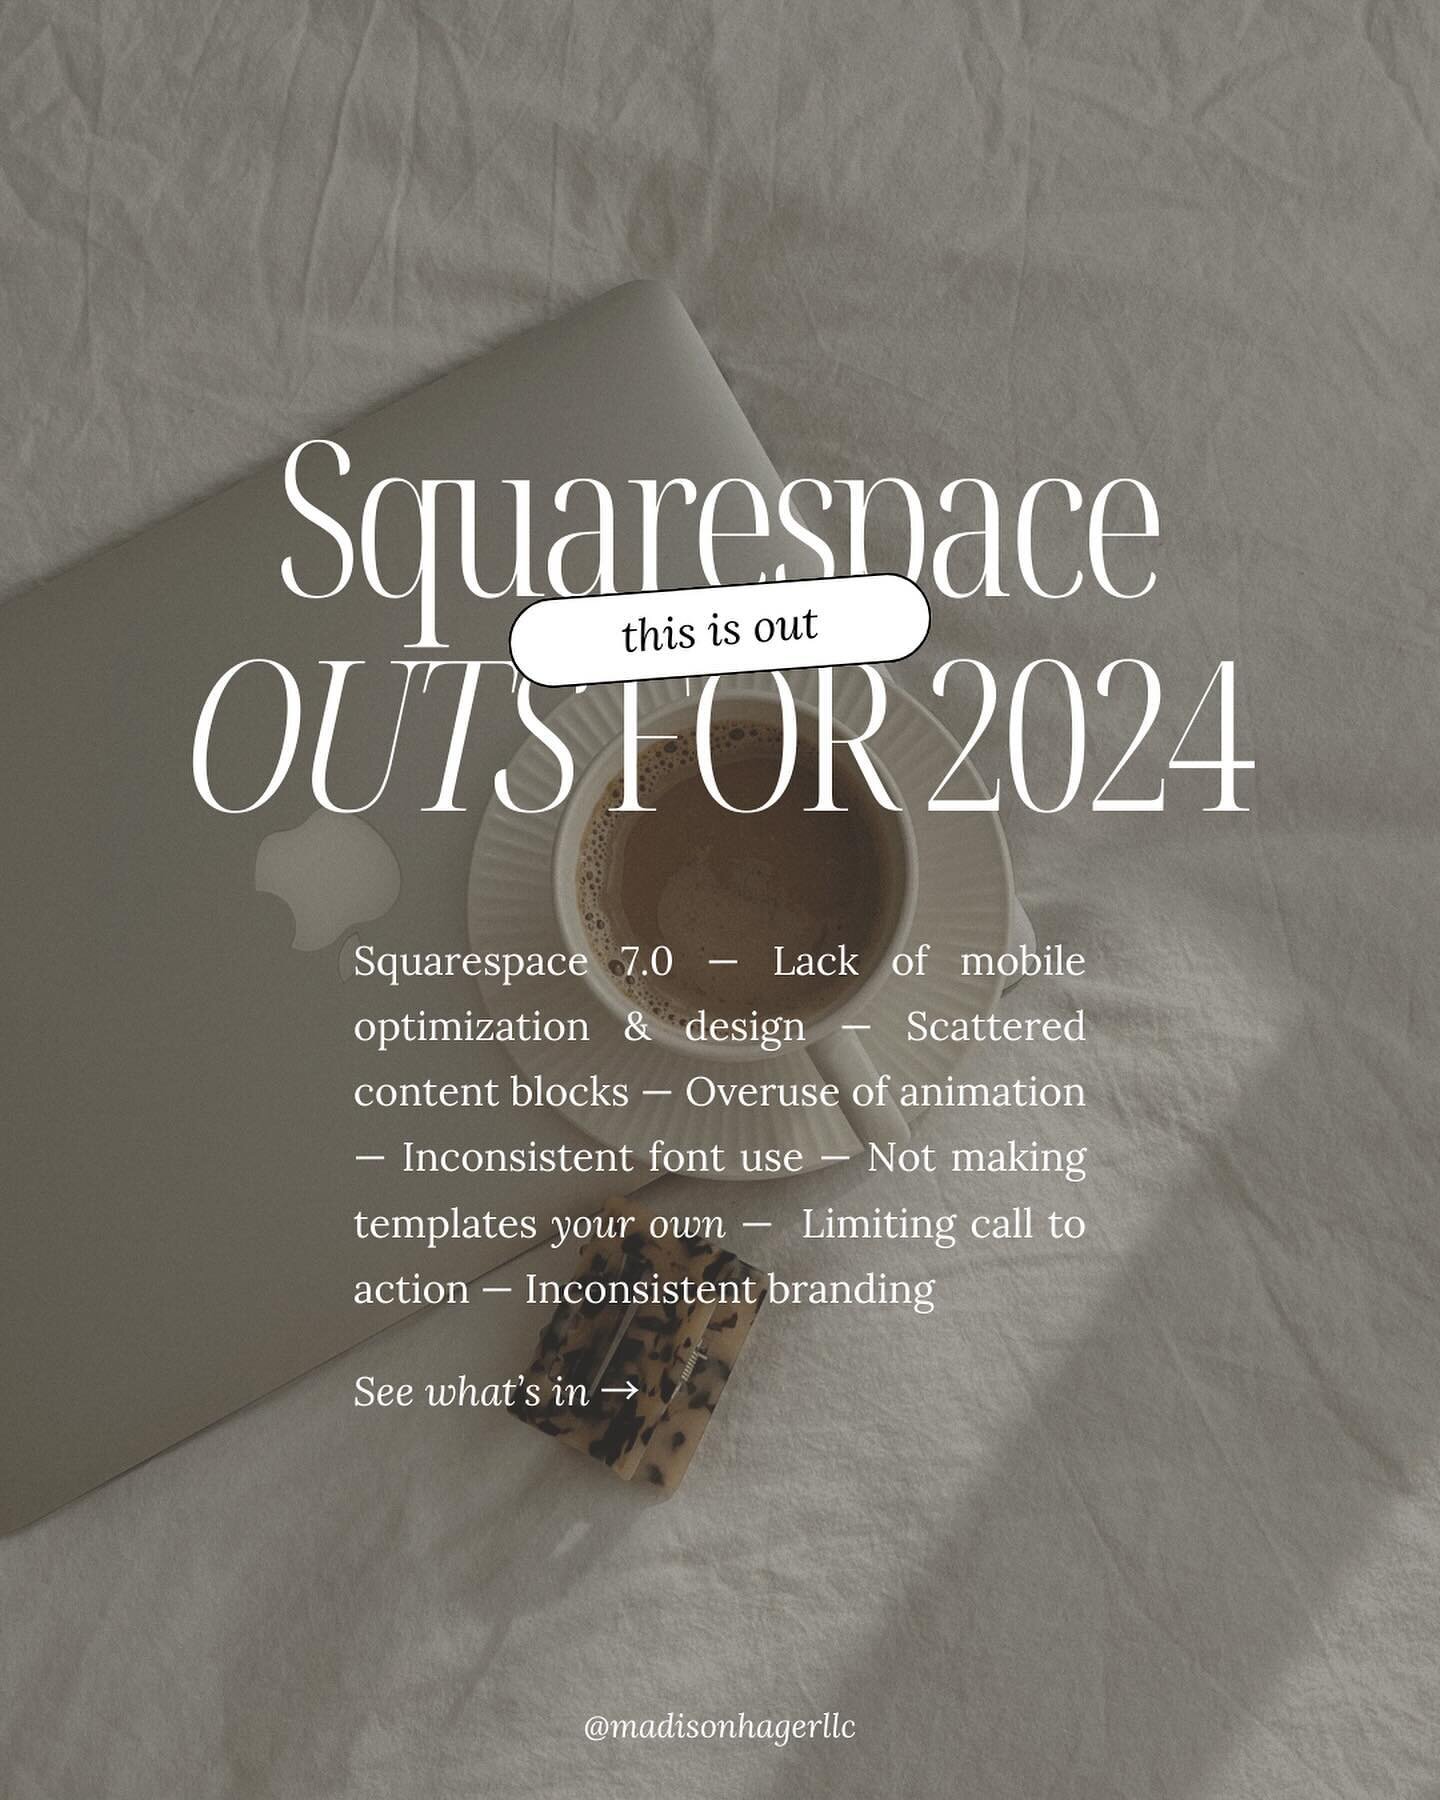 Thought I'd jump on the trend! ✨

If you're guilty of any of the following on slide one, it's never too late to make those changes!

Let 2024 be the year of making your website stand out, building your clientele, increasing sales.

Squarespace has SO